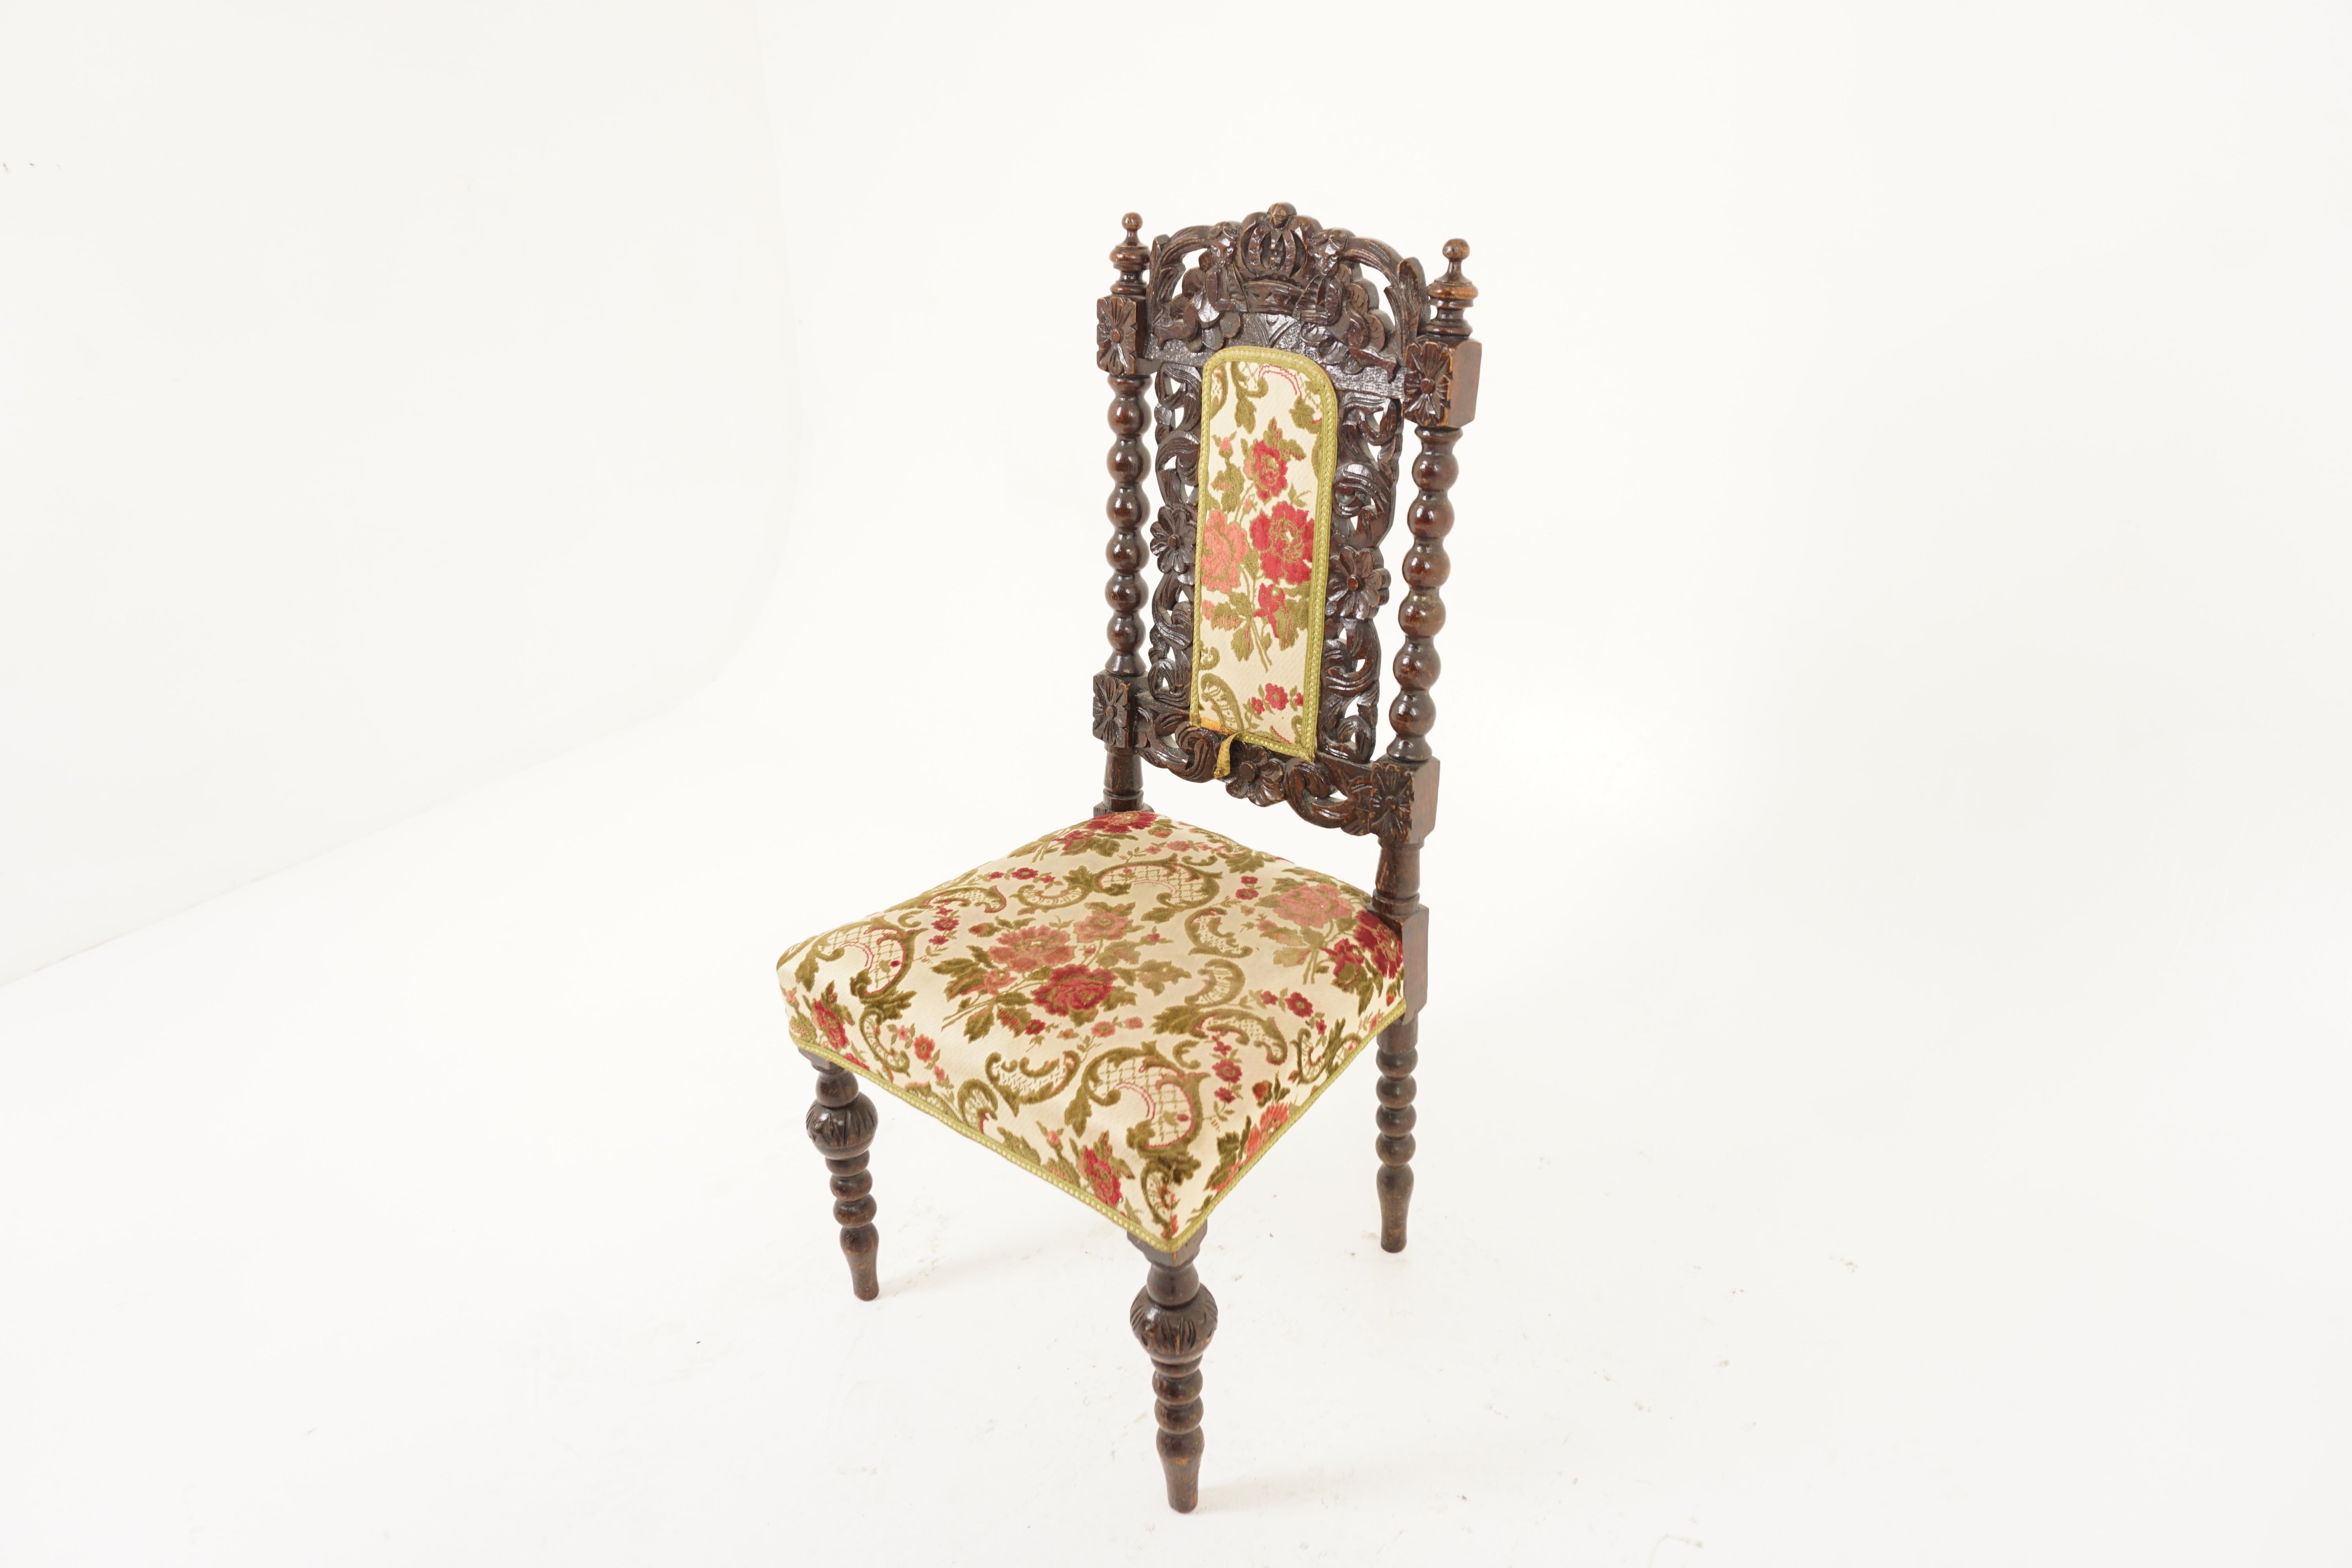 Antique Oak Chair, Victorian Gothic Heavily Carved Upholstered Hall Chair, Antique Furniture, Scotland 1880, H1117

+ Scotland 1880
+ Solid Oak 
+ Original Finish 
+ Heavily carved top rail with crown
+ With turned finials and bobbin